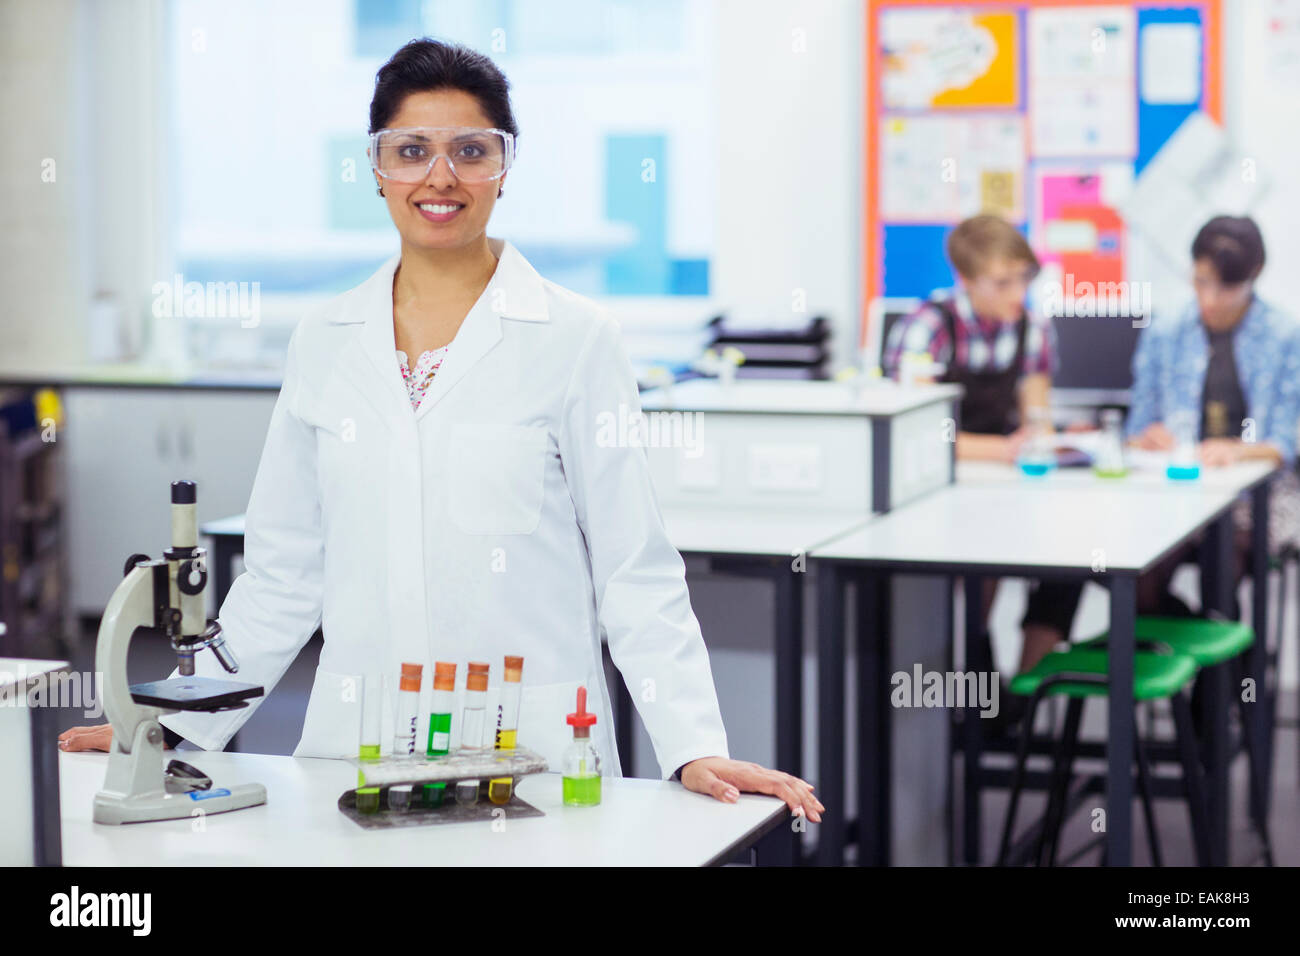 Portrait of smiling female teacher wearing protective eyewear, standing behind desk microscope and test tubes in rack students Stock Photo